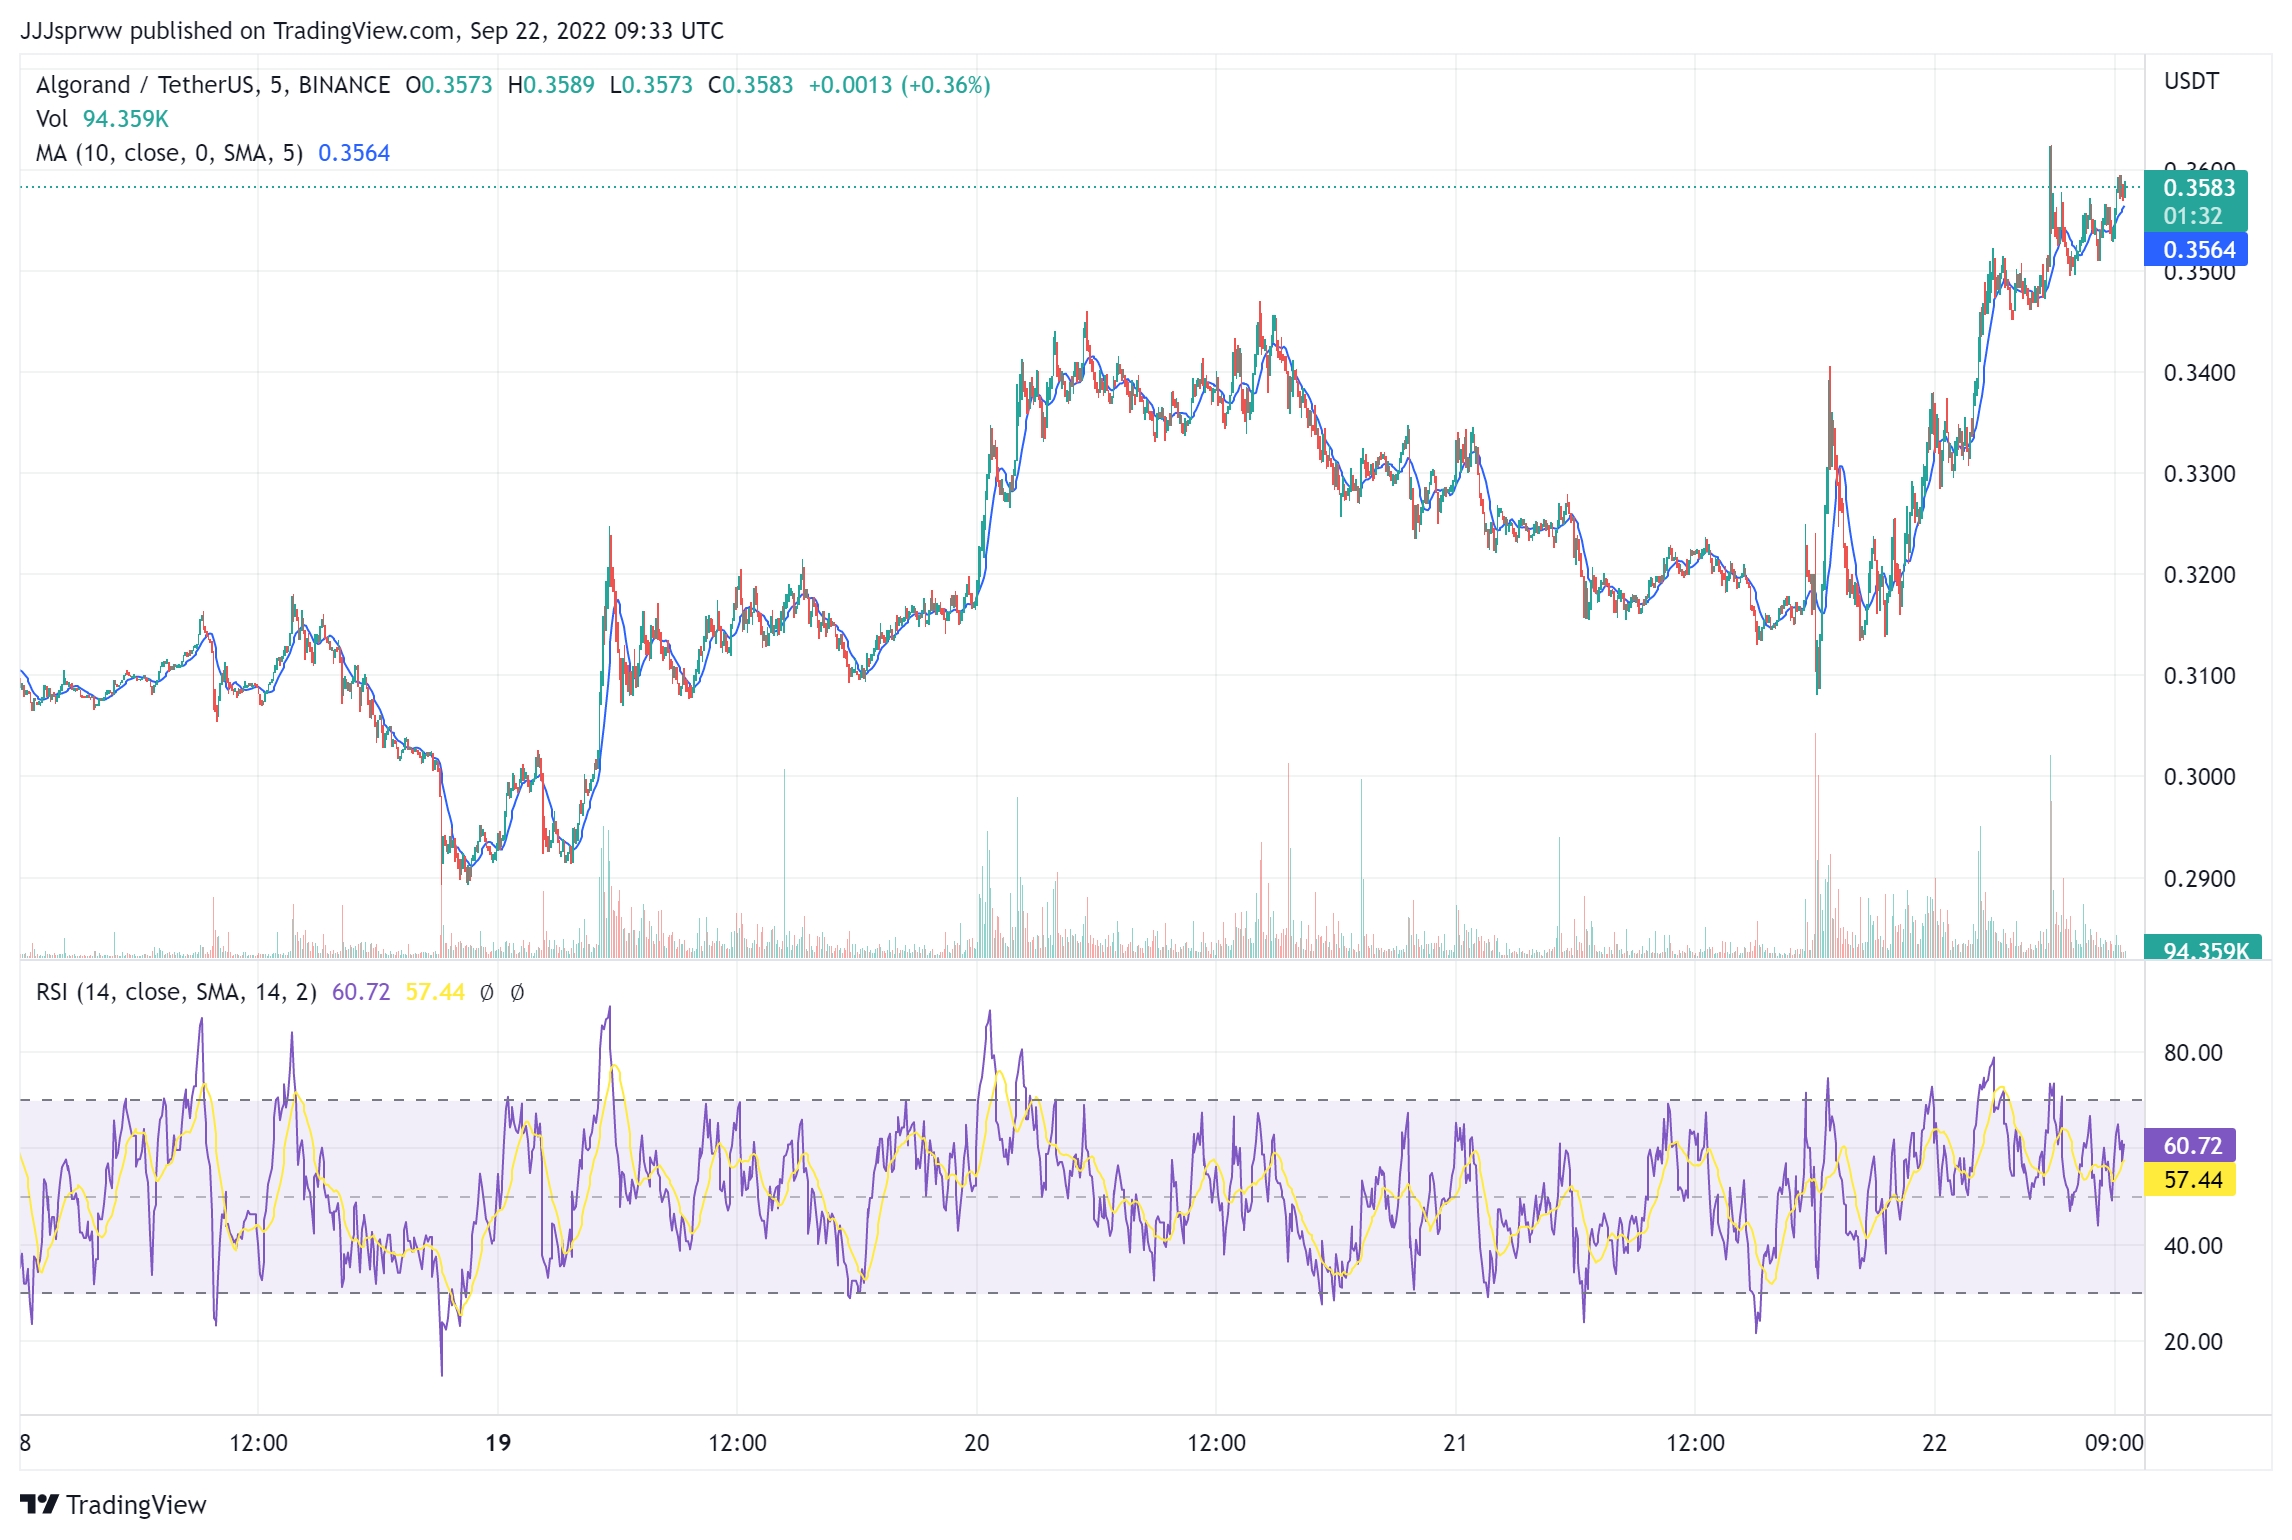 Algorand Price Prediction: Up 10% to $0.35, Can ALGO Get Back Above $1.00? Forks Daily